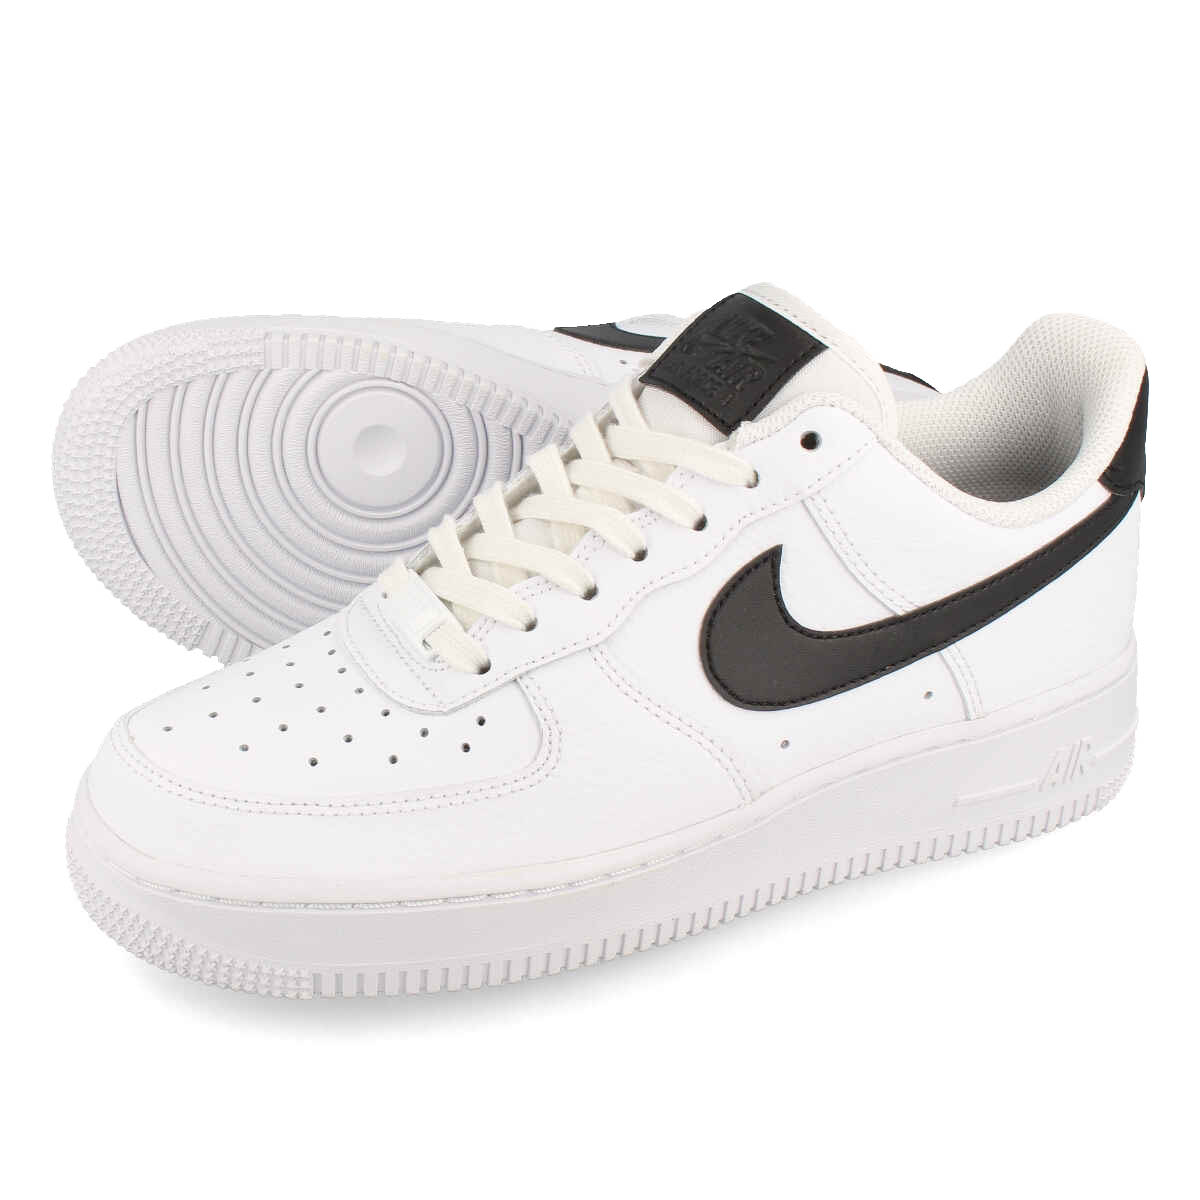 nike air force 1 women's black and white